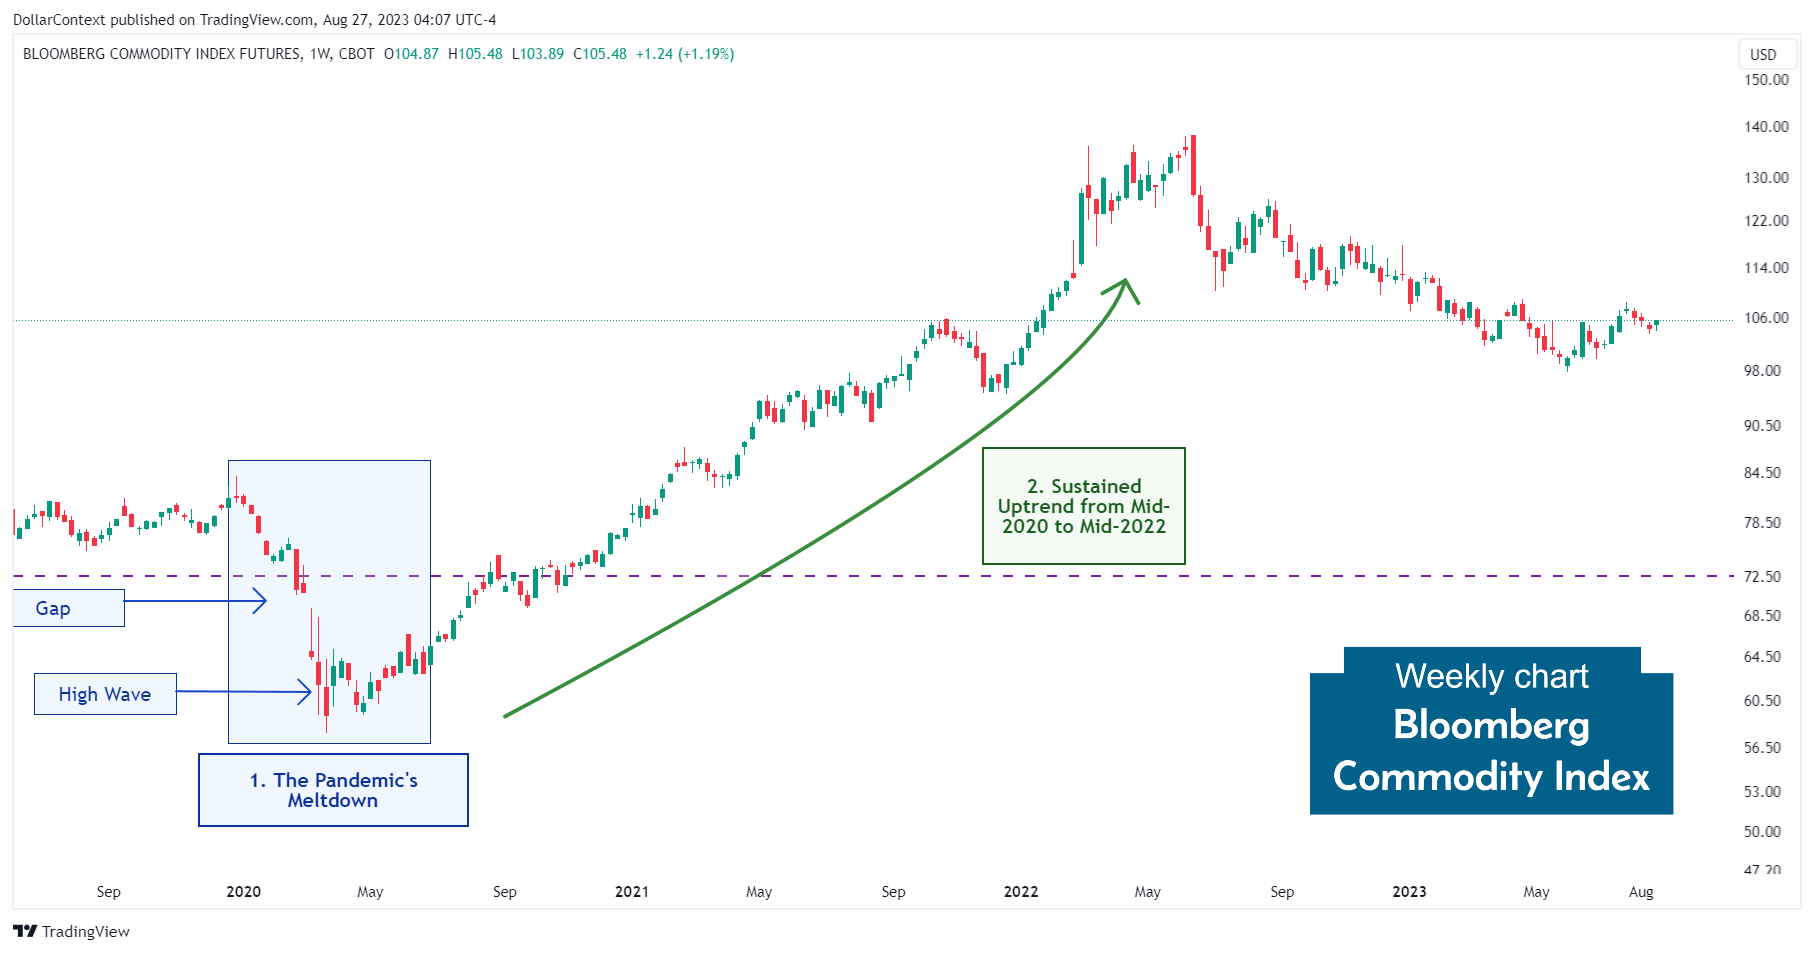 Bloomberg Commodity Index: Uptrend from Mid-2020 to Mid-2022 (Weekly Chart)